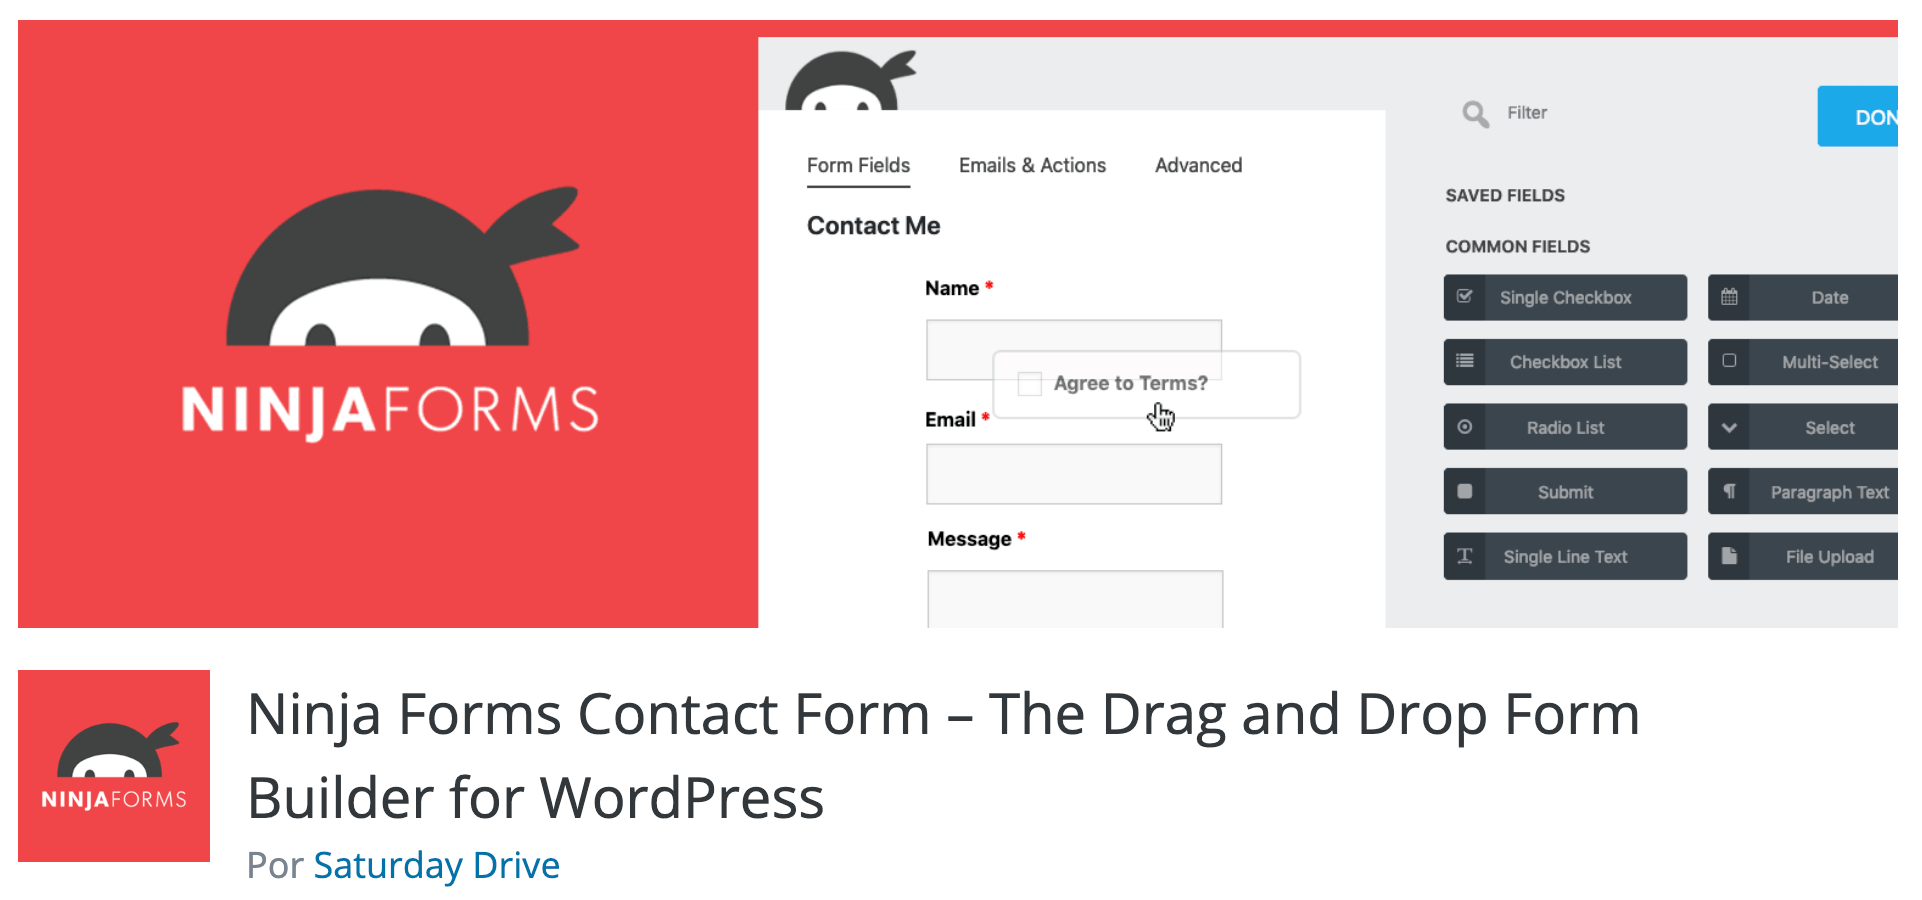 Ninja Forms Contact Form – The Drag and Drop Form Builder for WordPress